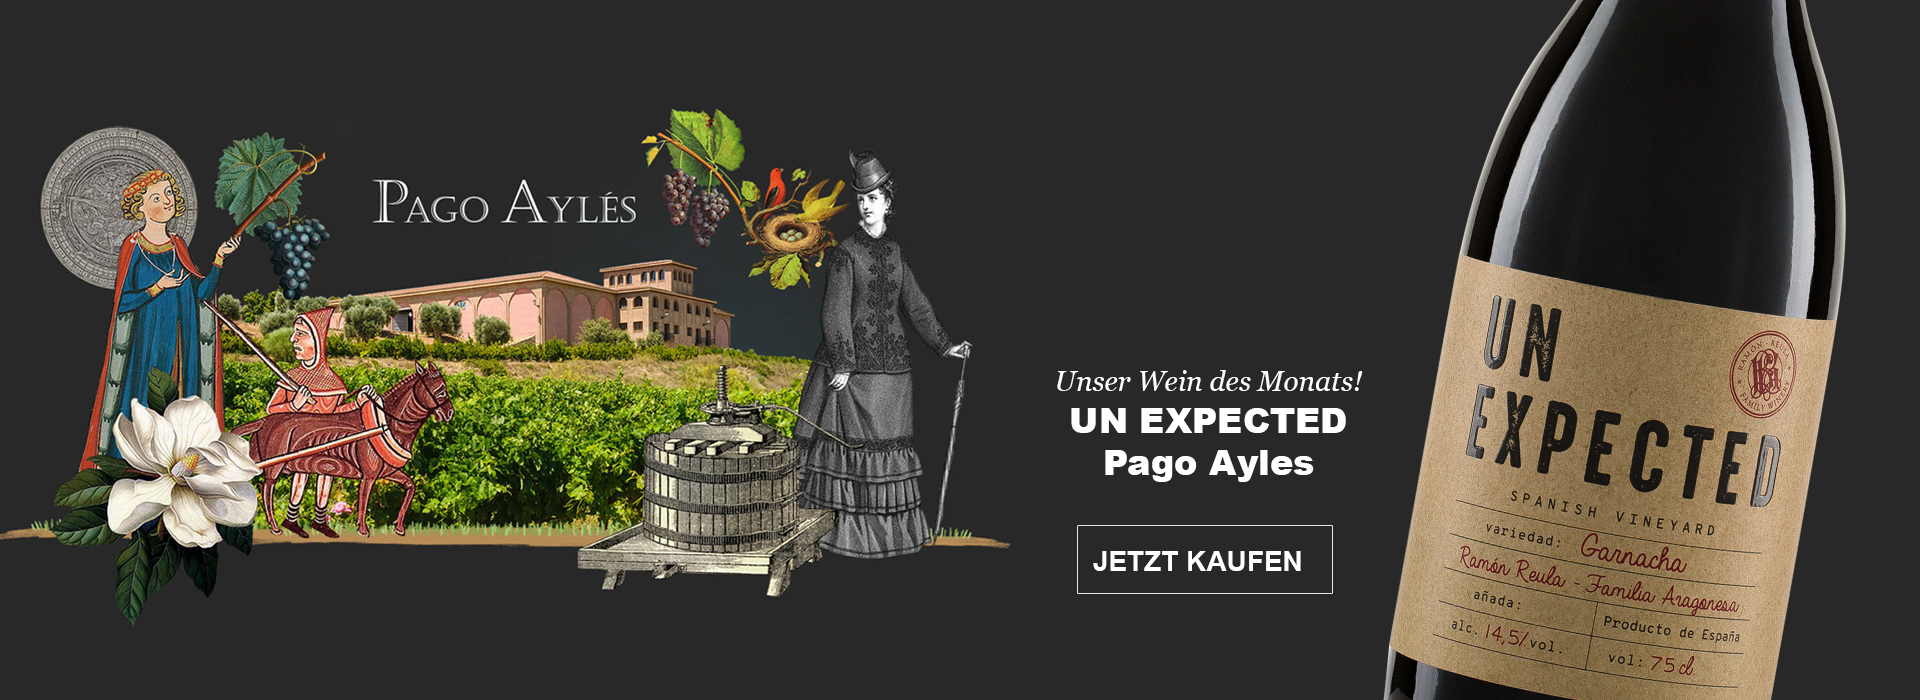 Unser Wein des Monats: UN EXPECTED Pago Ayles